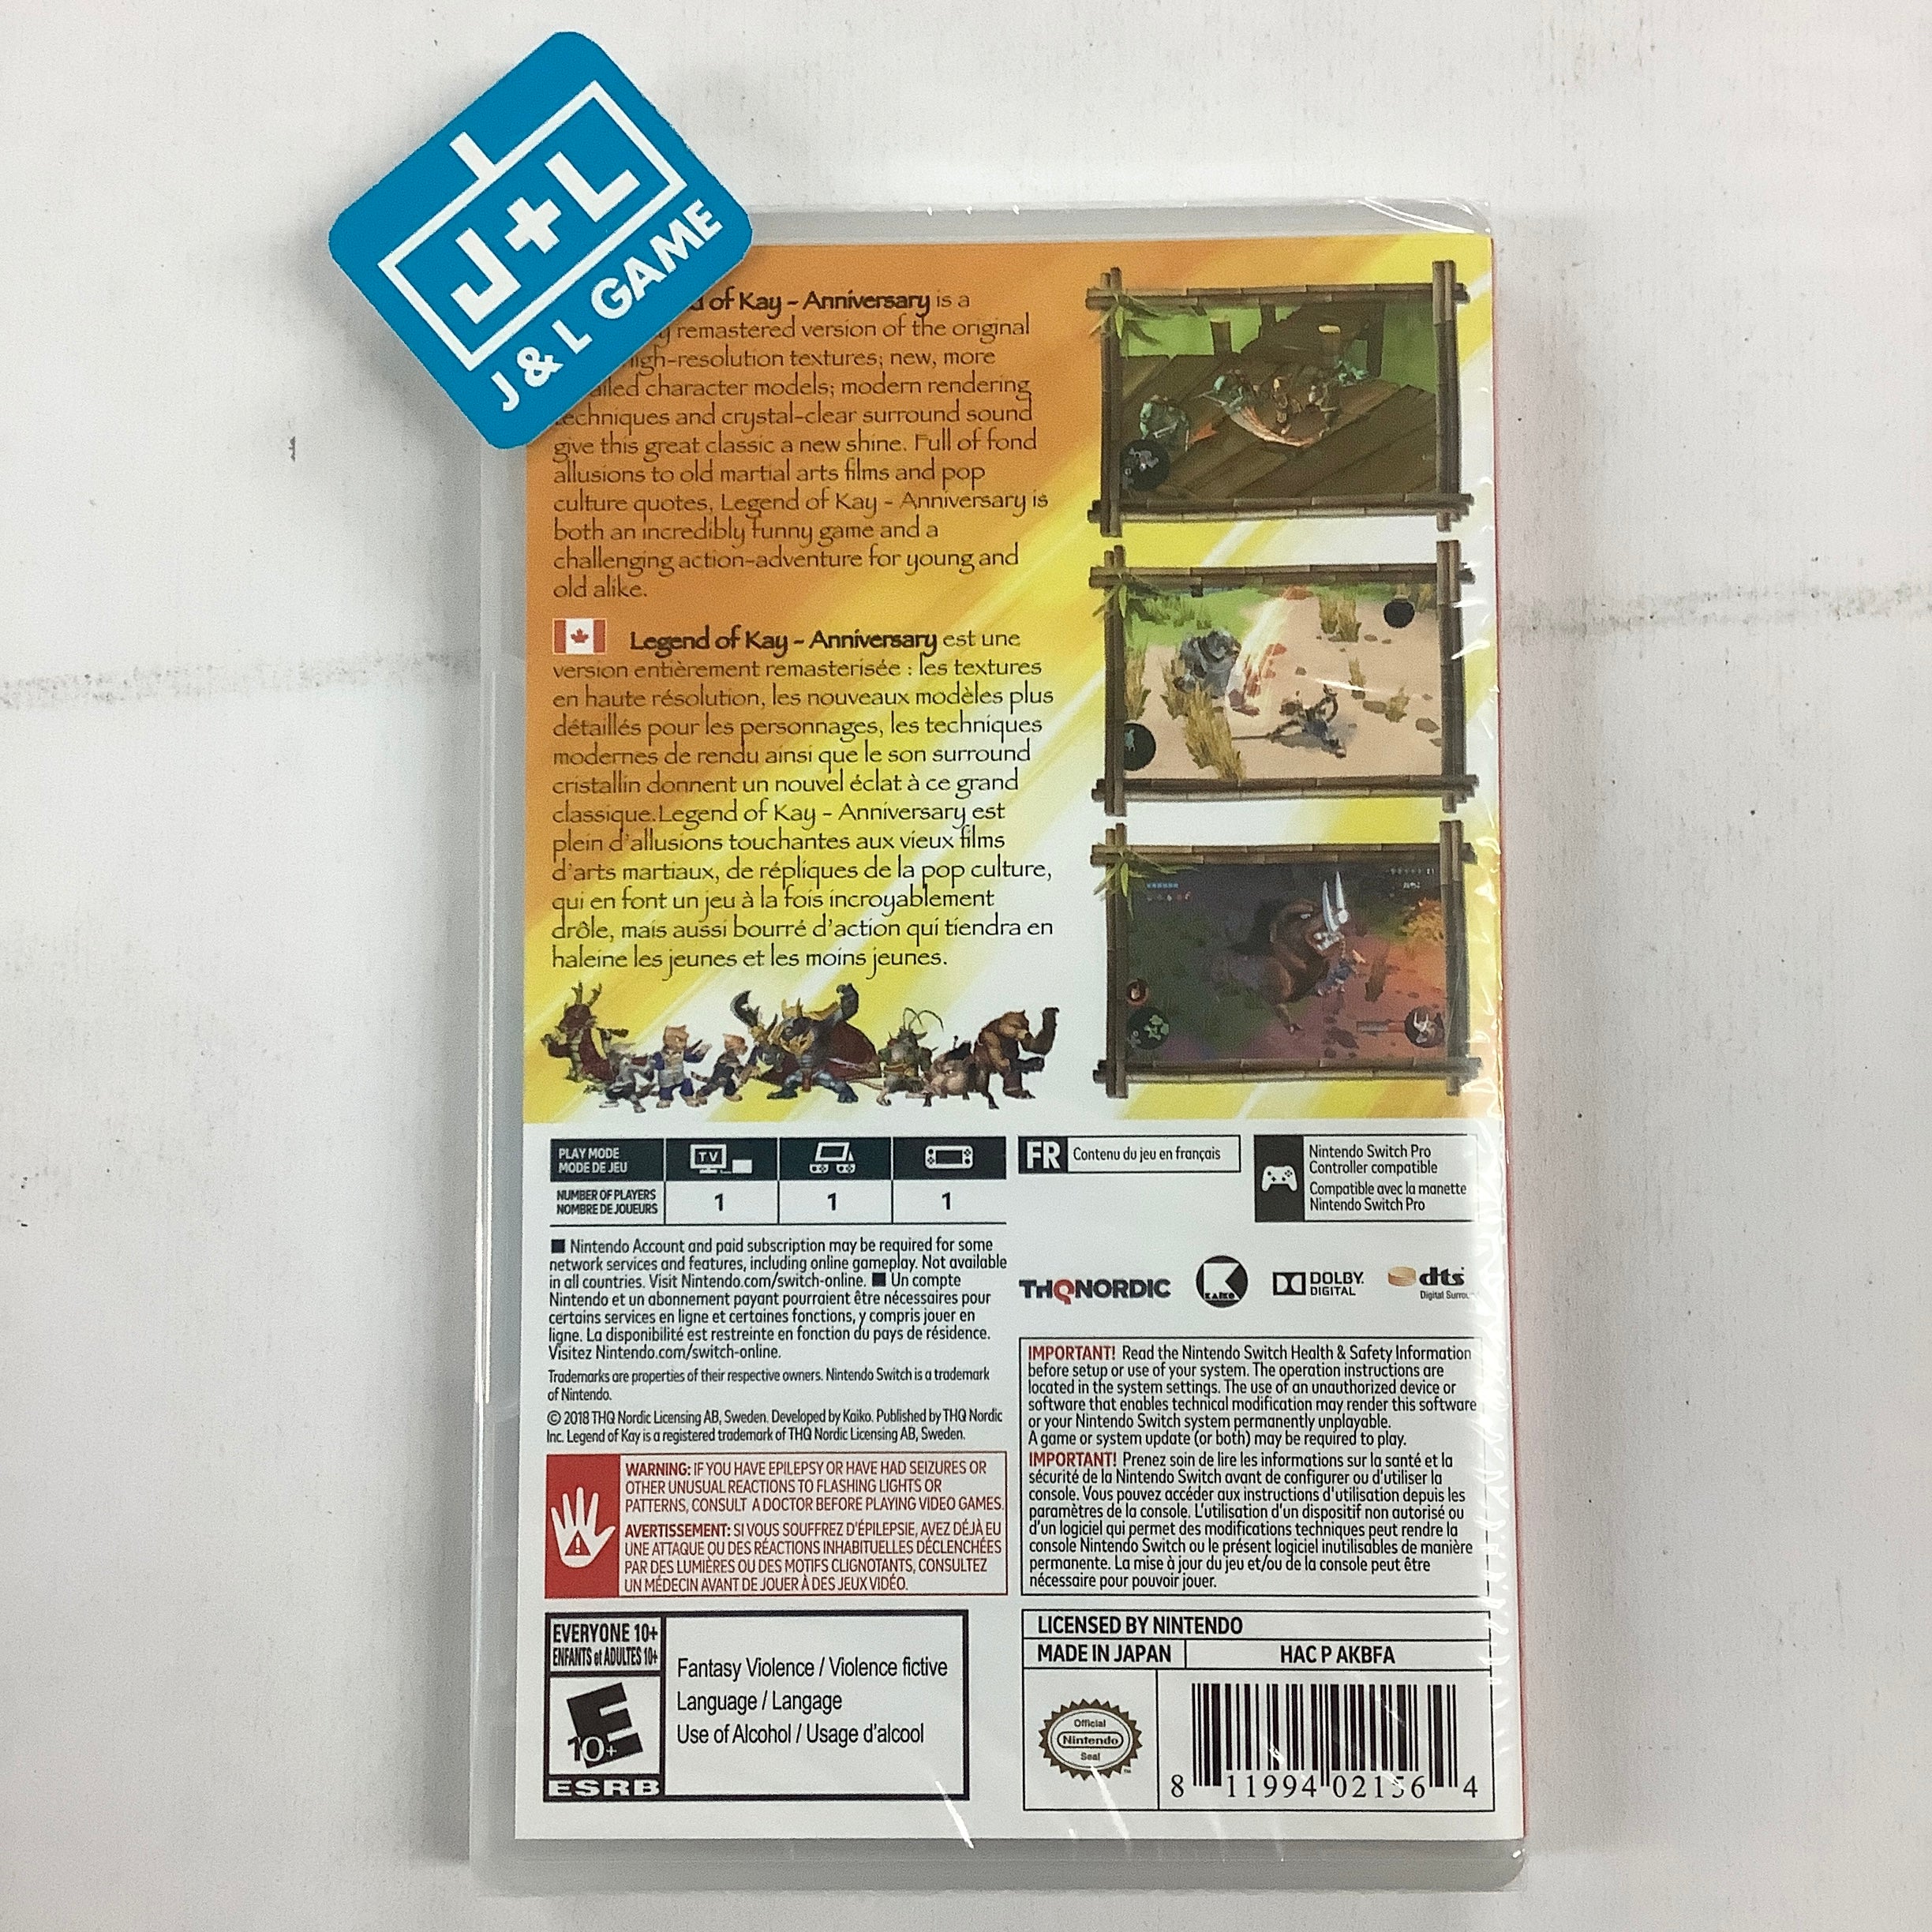 Legend of Kay - Anniversary - (NSW) Nintendo Switch Video Games THQ Nordic   